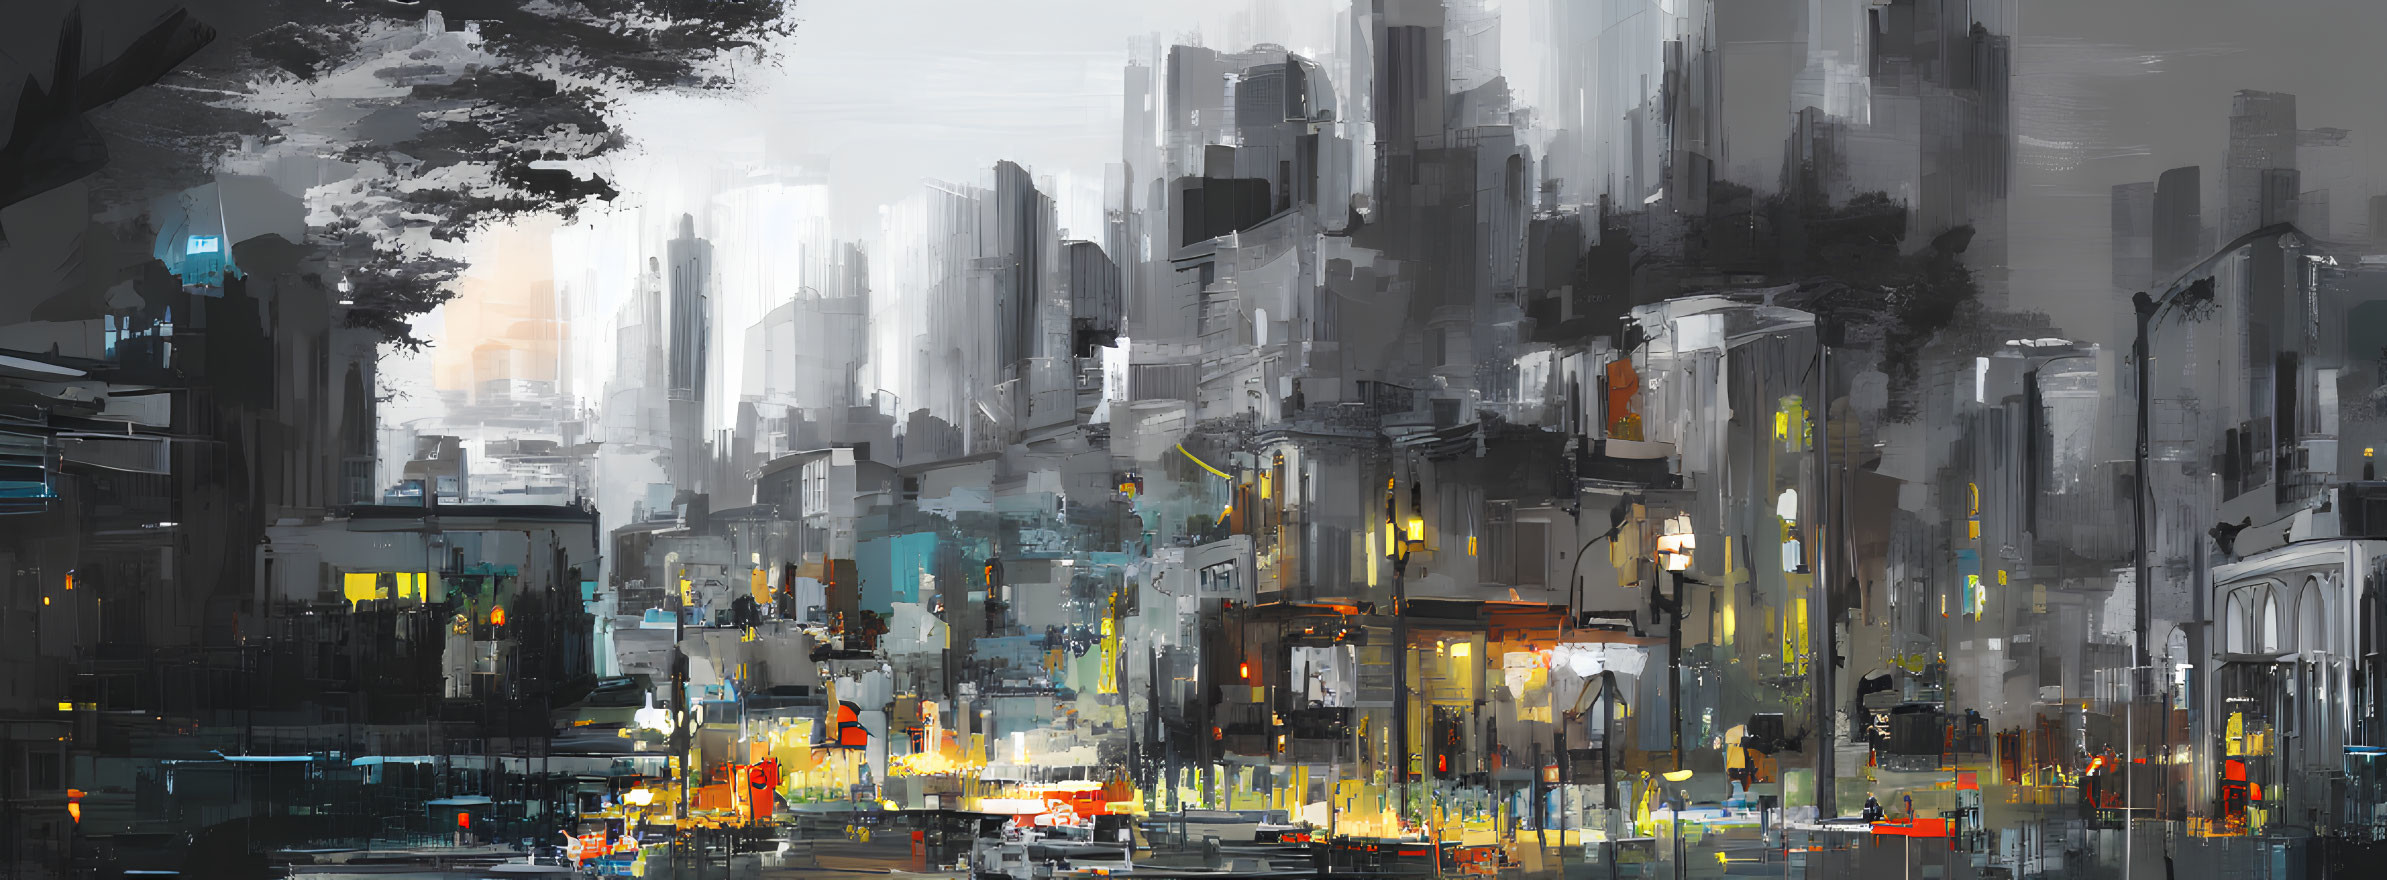 Monochromatic cityscape painting with tall buildings and street lights